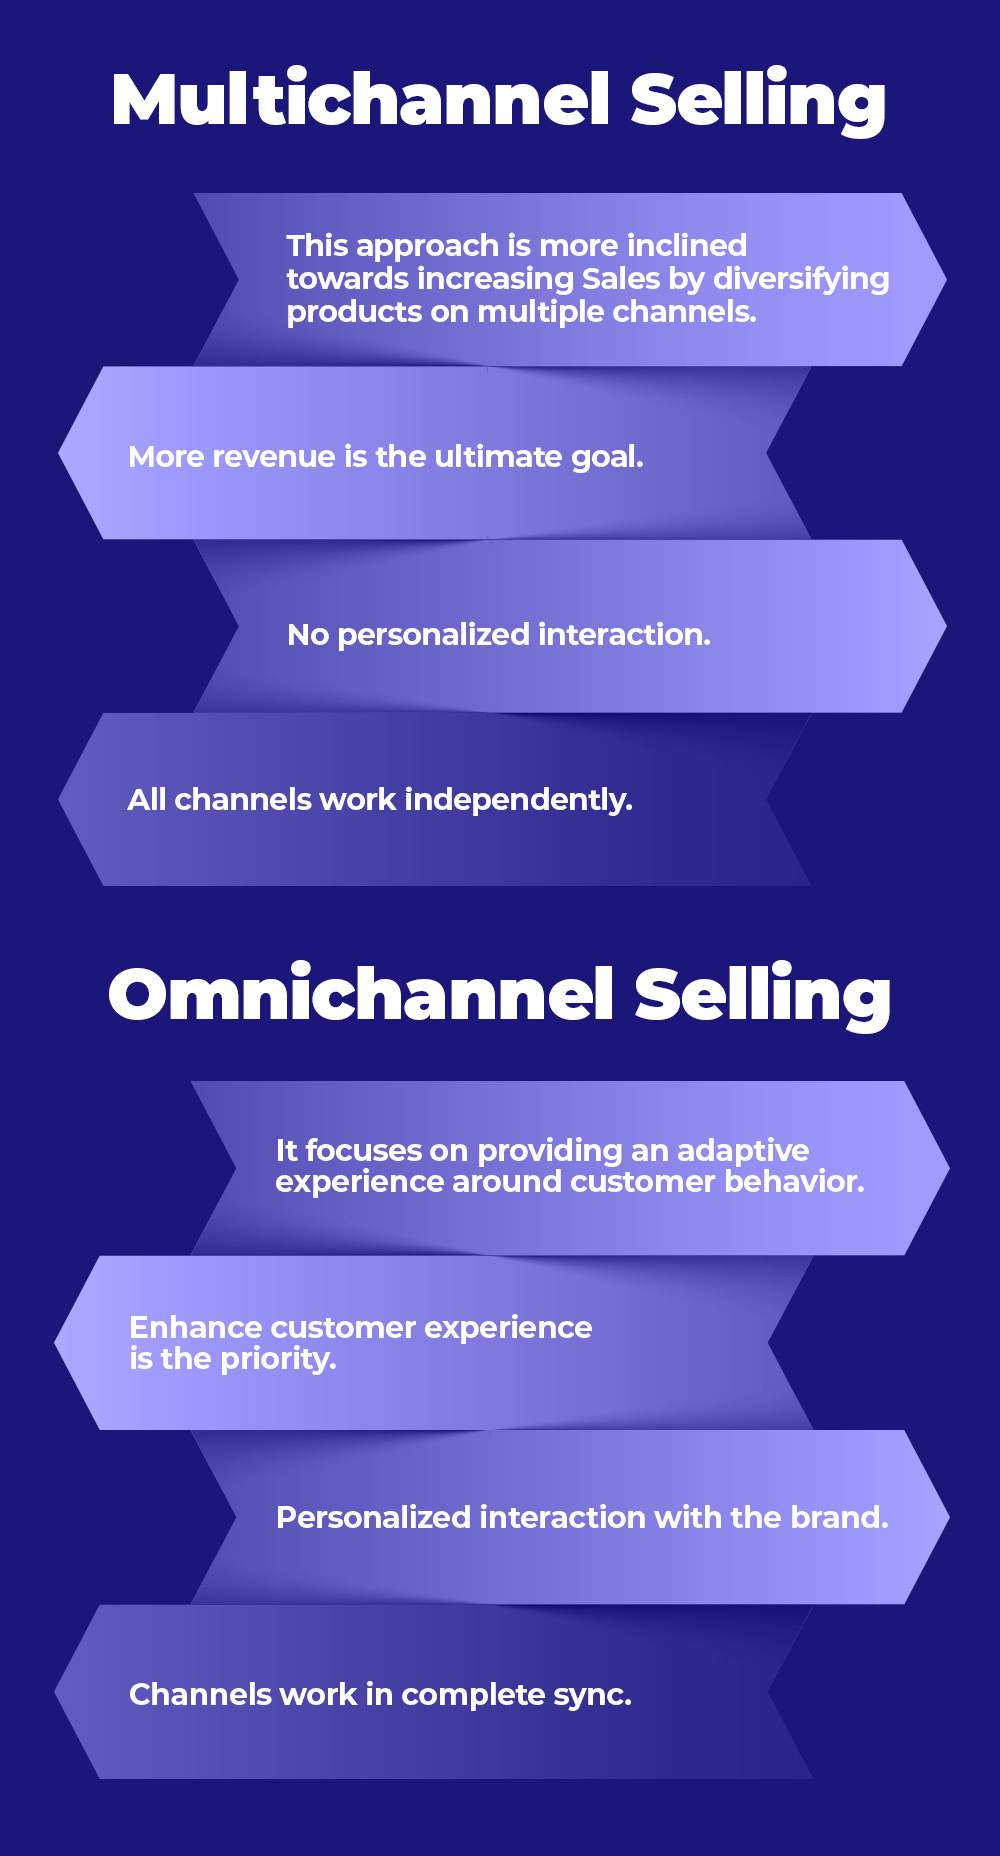 Difference between multichannel and omnichannel selling